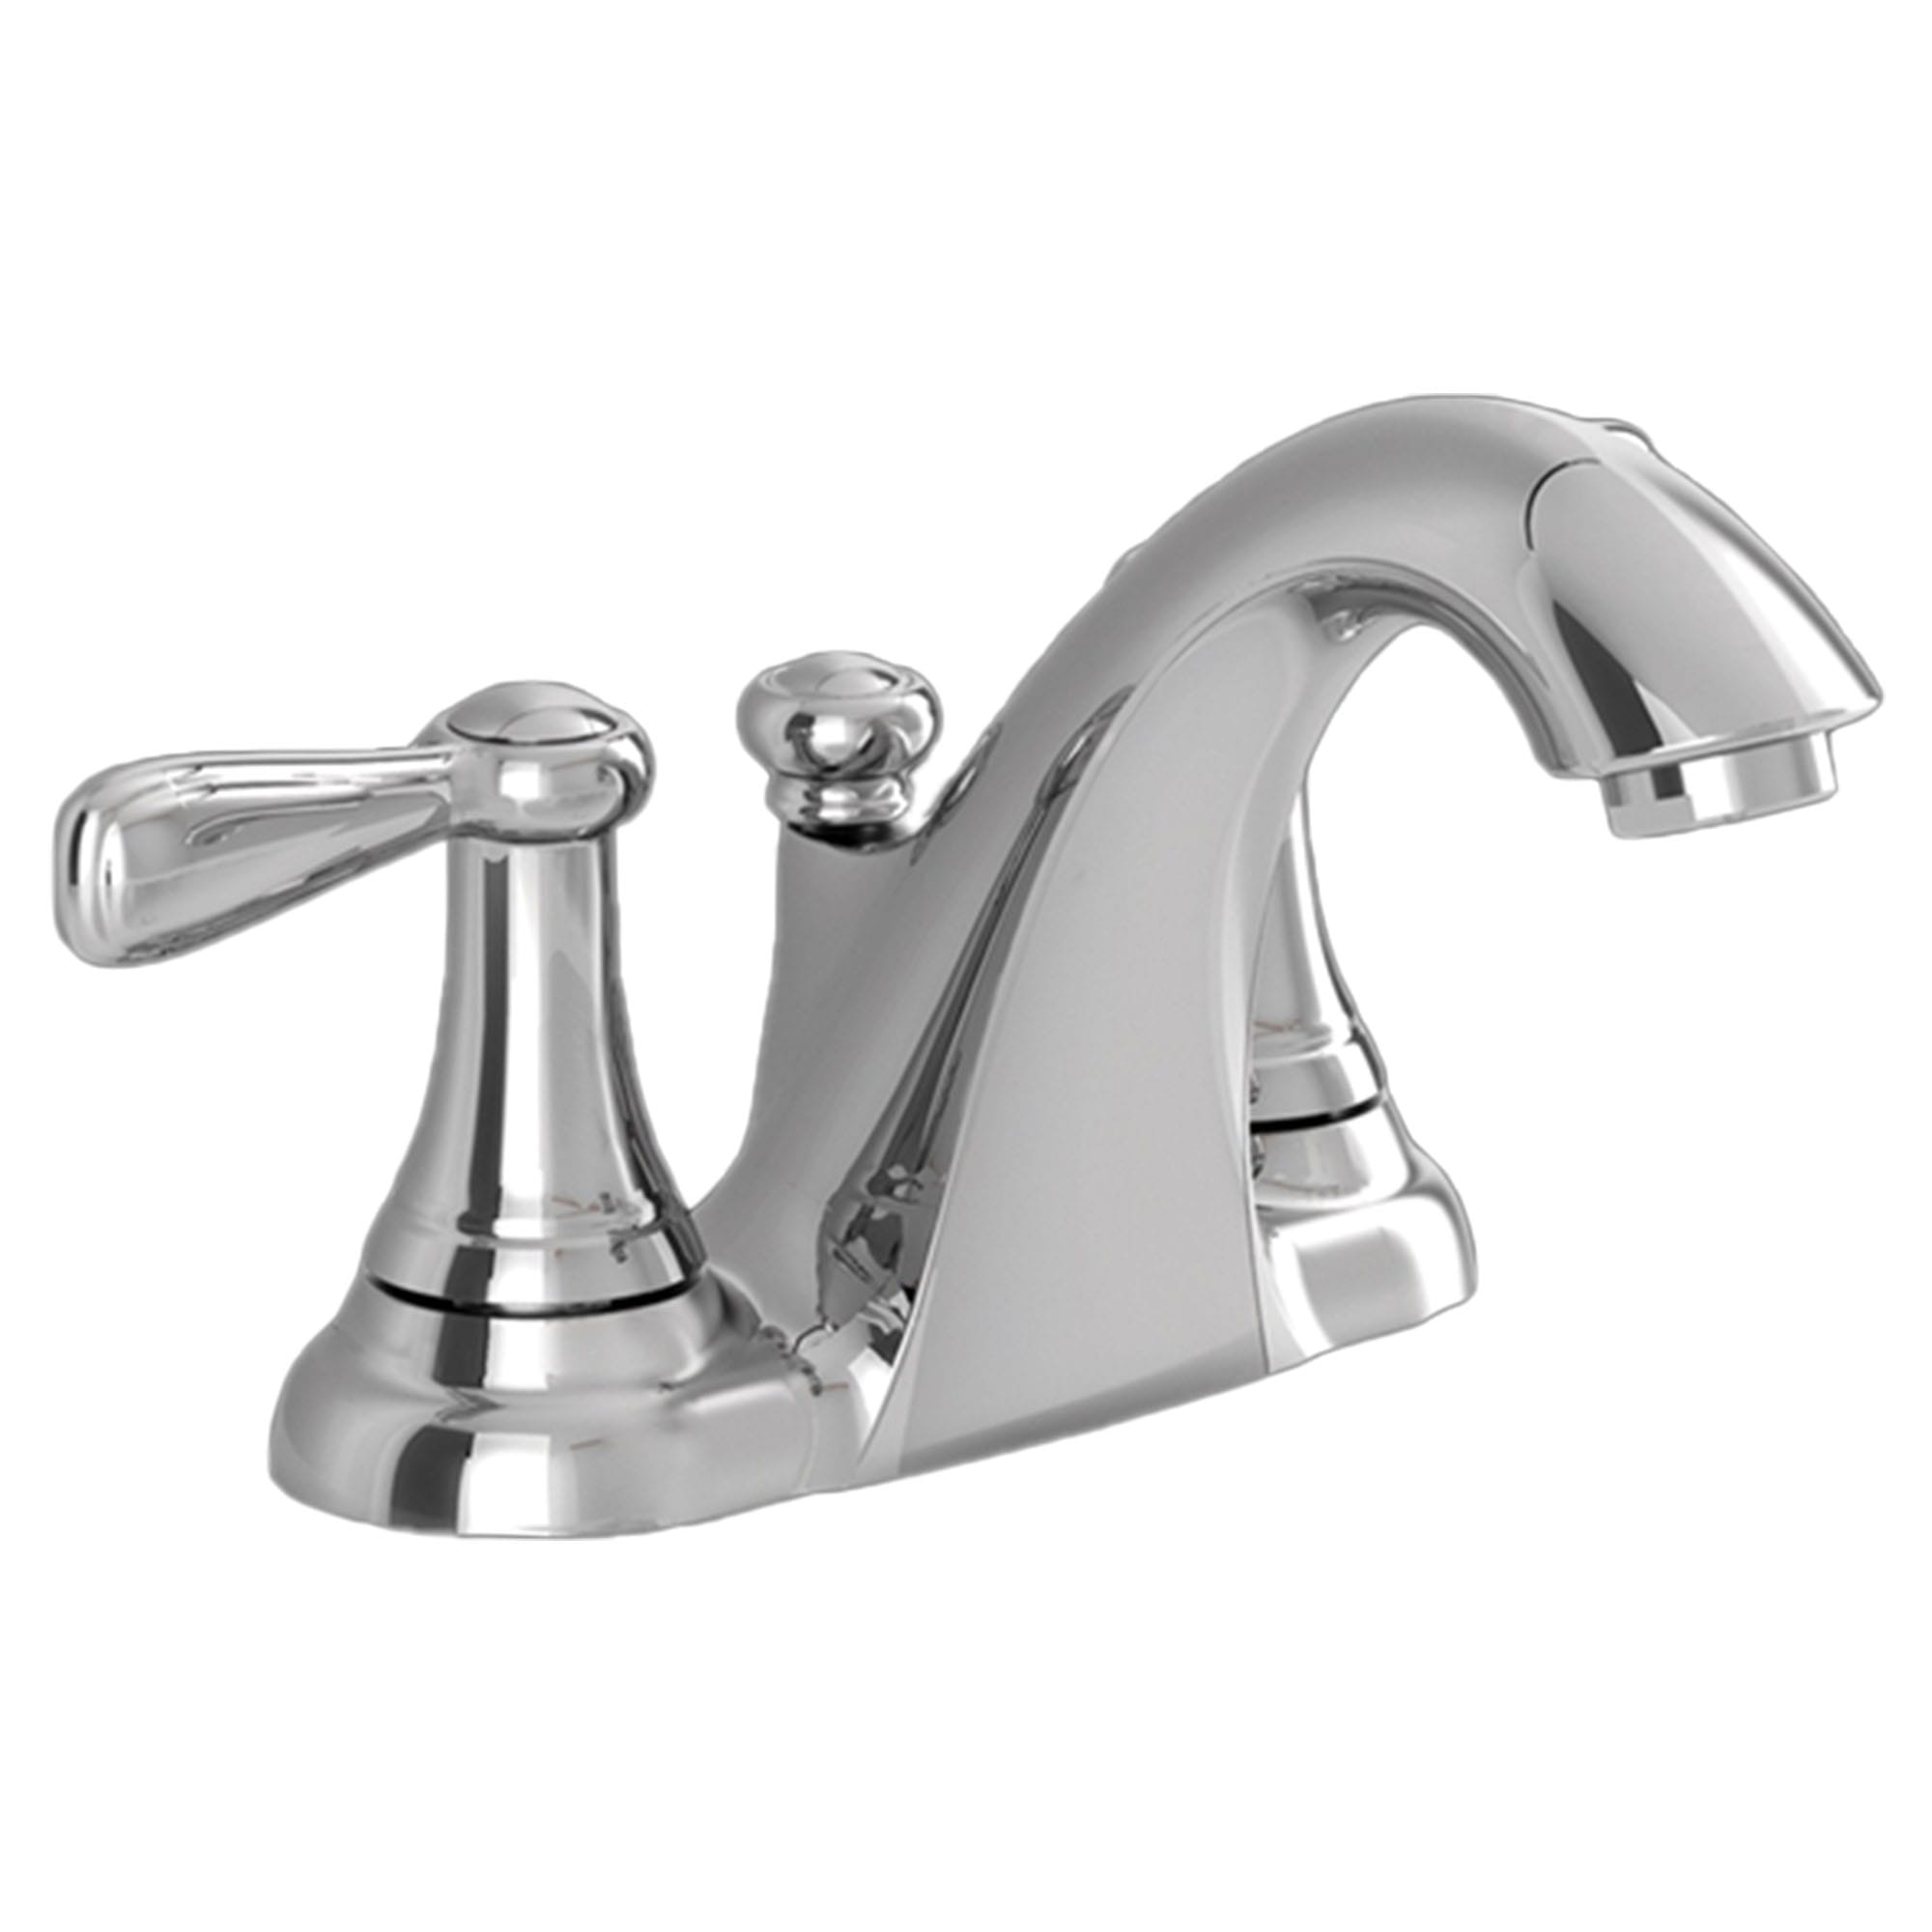 Marquette 4-Inch Centerset 2-Handle Low-Arc Bathroom Faucet 1.5 GPM with Drain